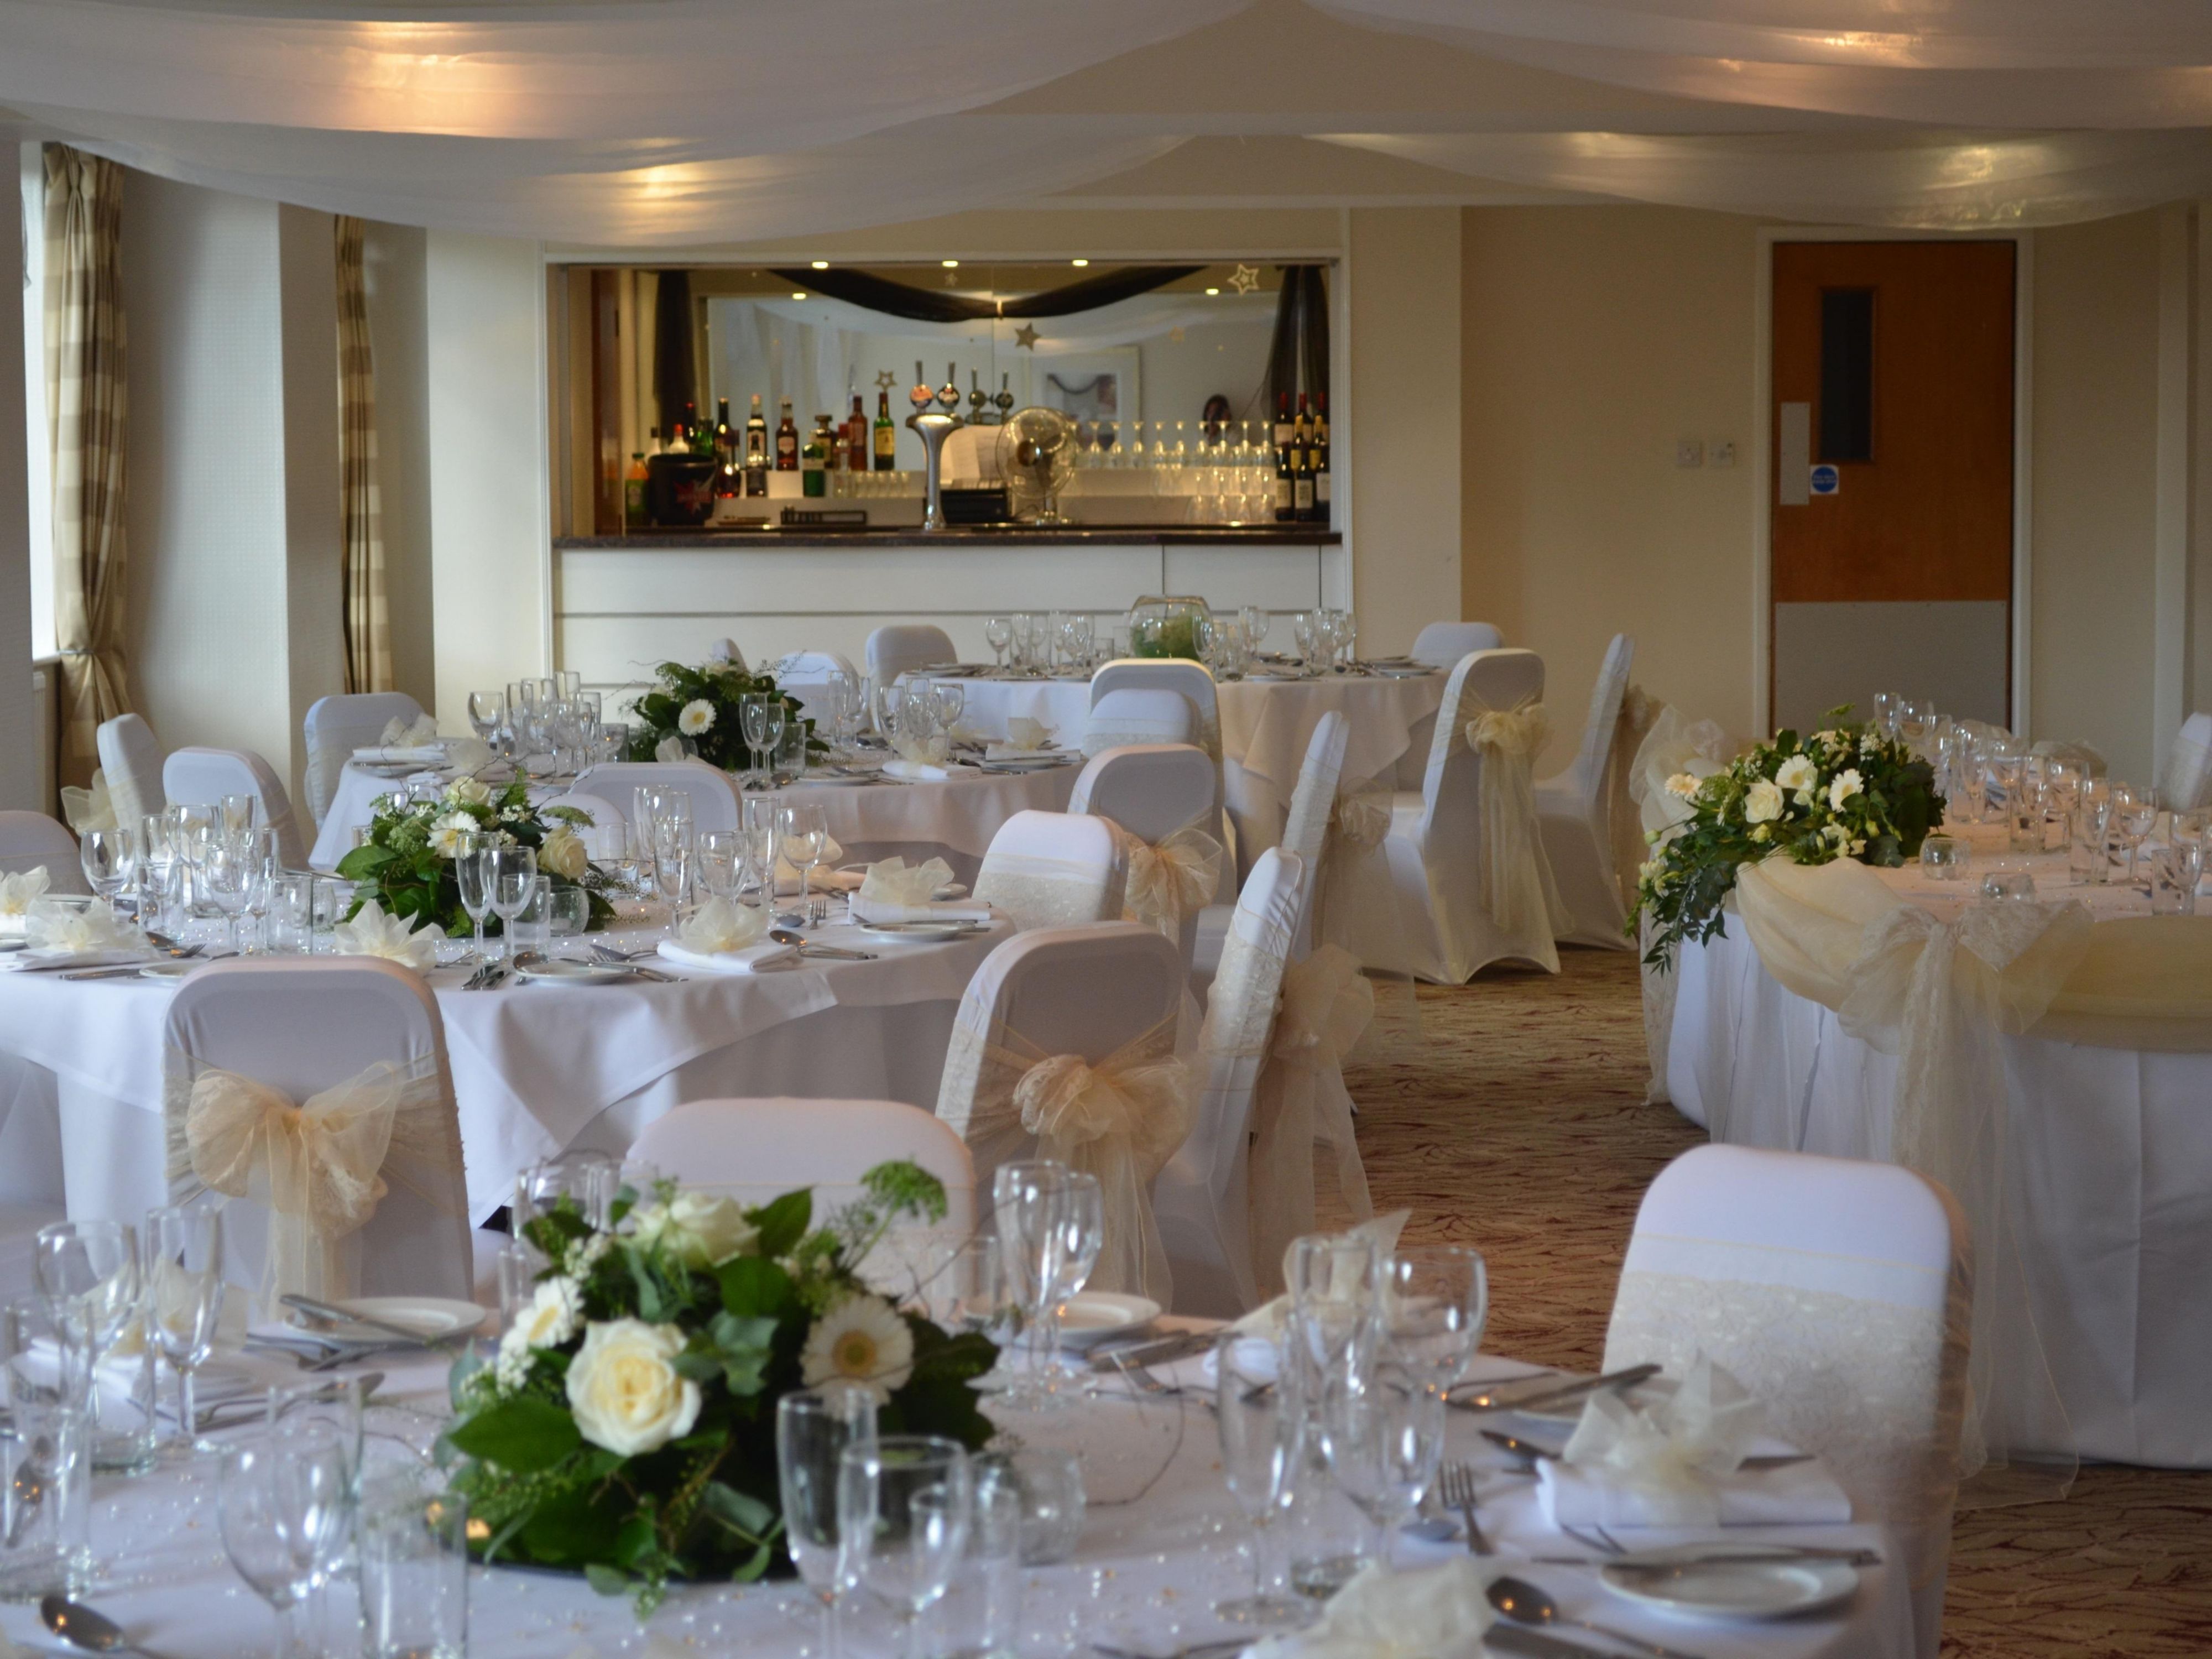 Allow us to create a magical event at Holiday Inn Ashford North where we make every effort to ensure your special day is unique and exclusive to you. 
With carefully designed packages created, we have something to suit every taste and budget. Contact us on 01233 713333 to make an appointment with our Wedding coordinator.